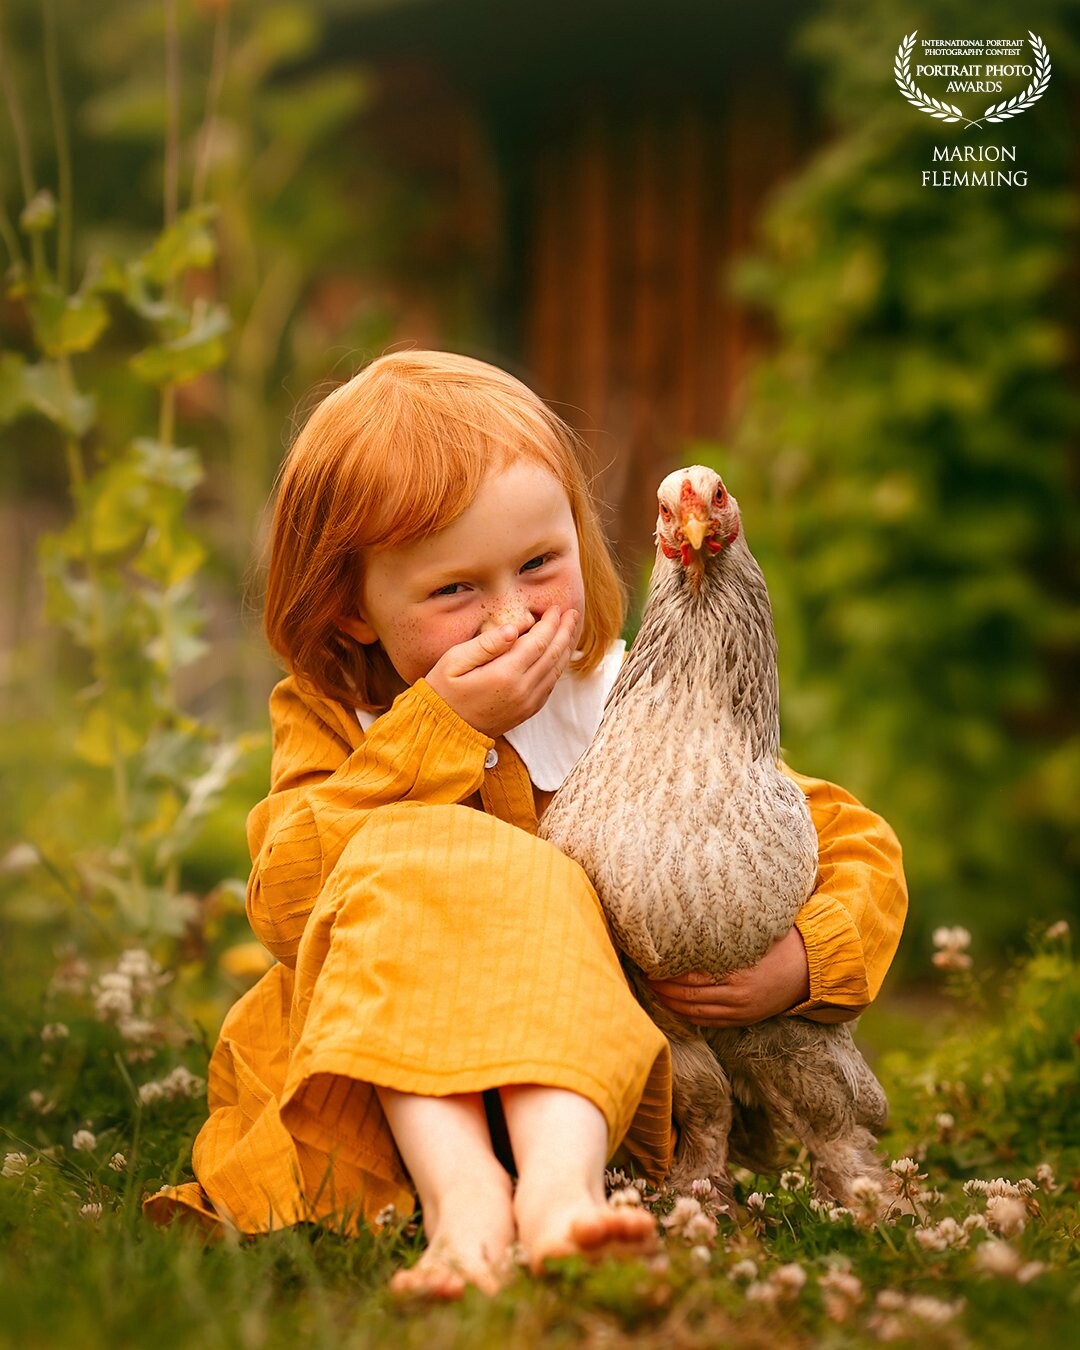 Litlle girl and her favorite pet: Henna the chicken. <br />
Taken in a private garden in the late afternoon light, wit a lot of colors in the clothing and the greens.